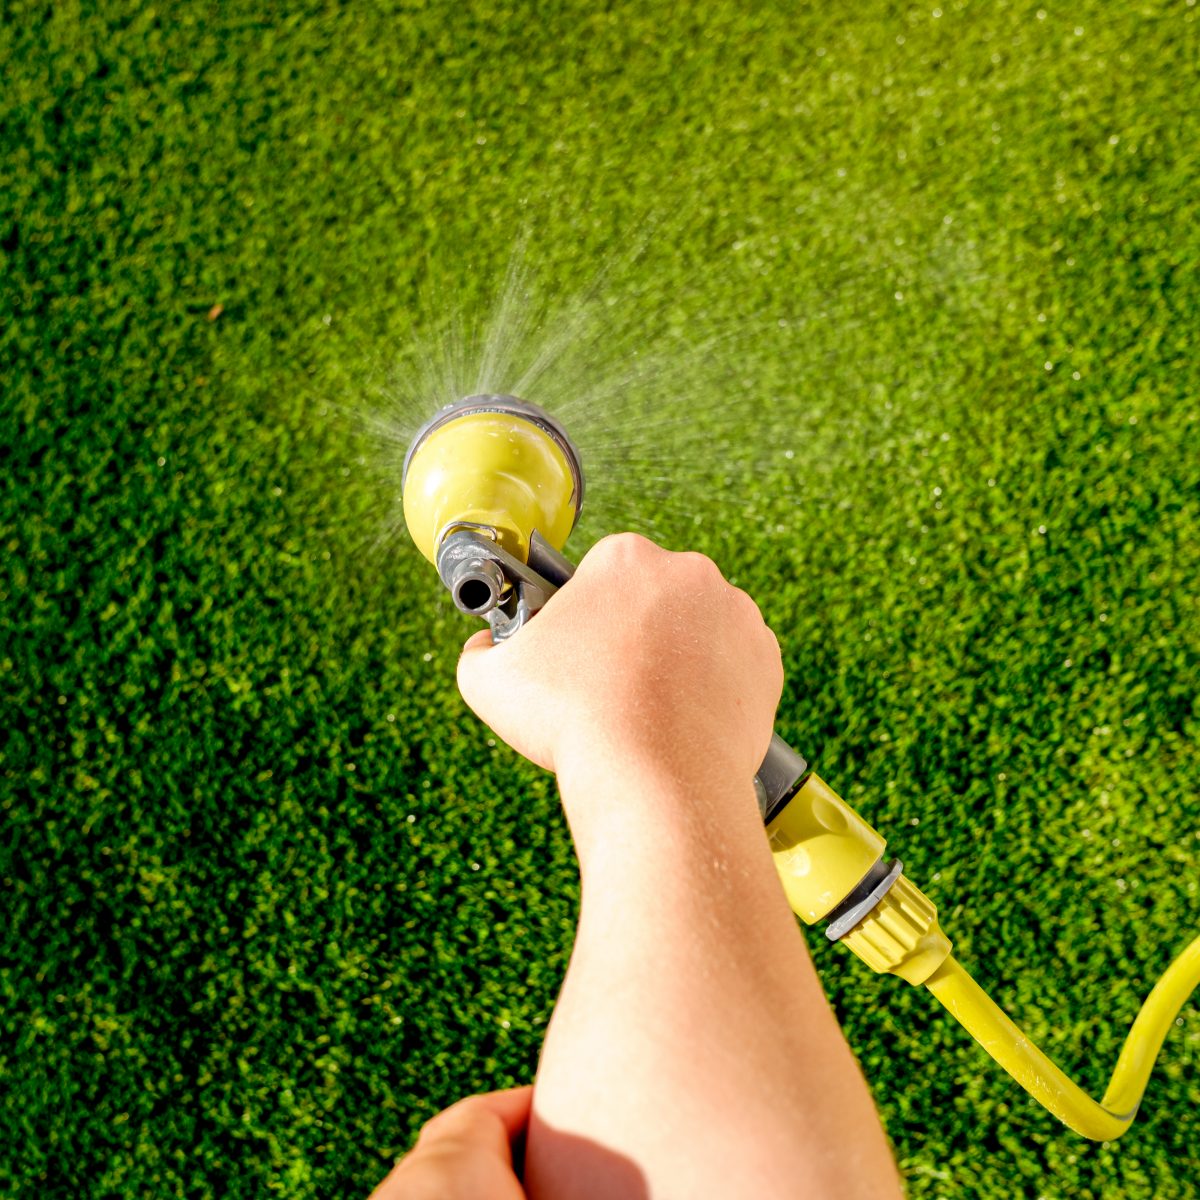 Child's hand watering the grass during the summer with a hose.